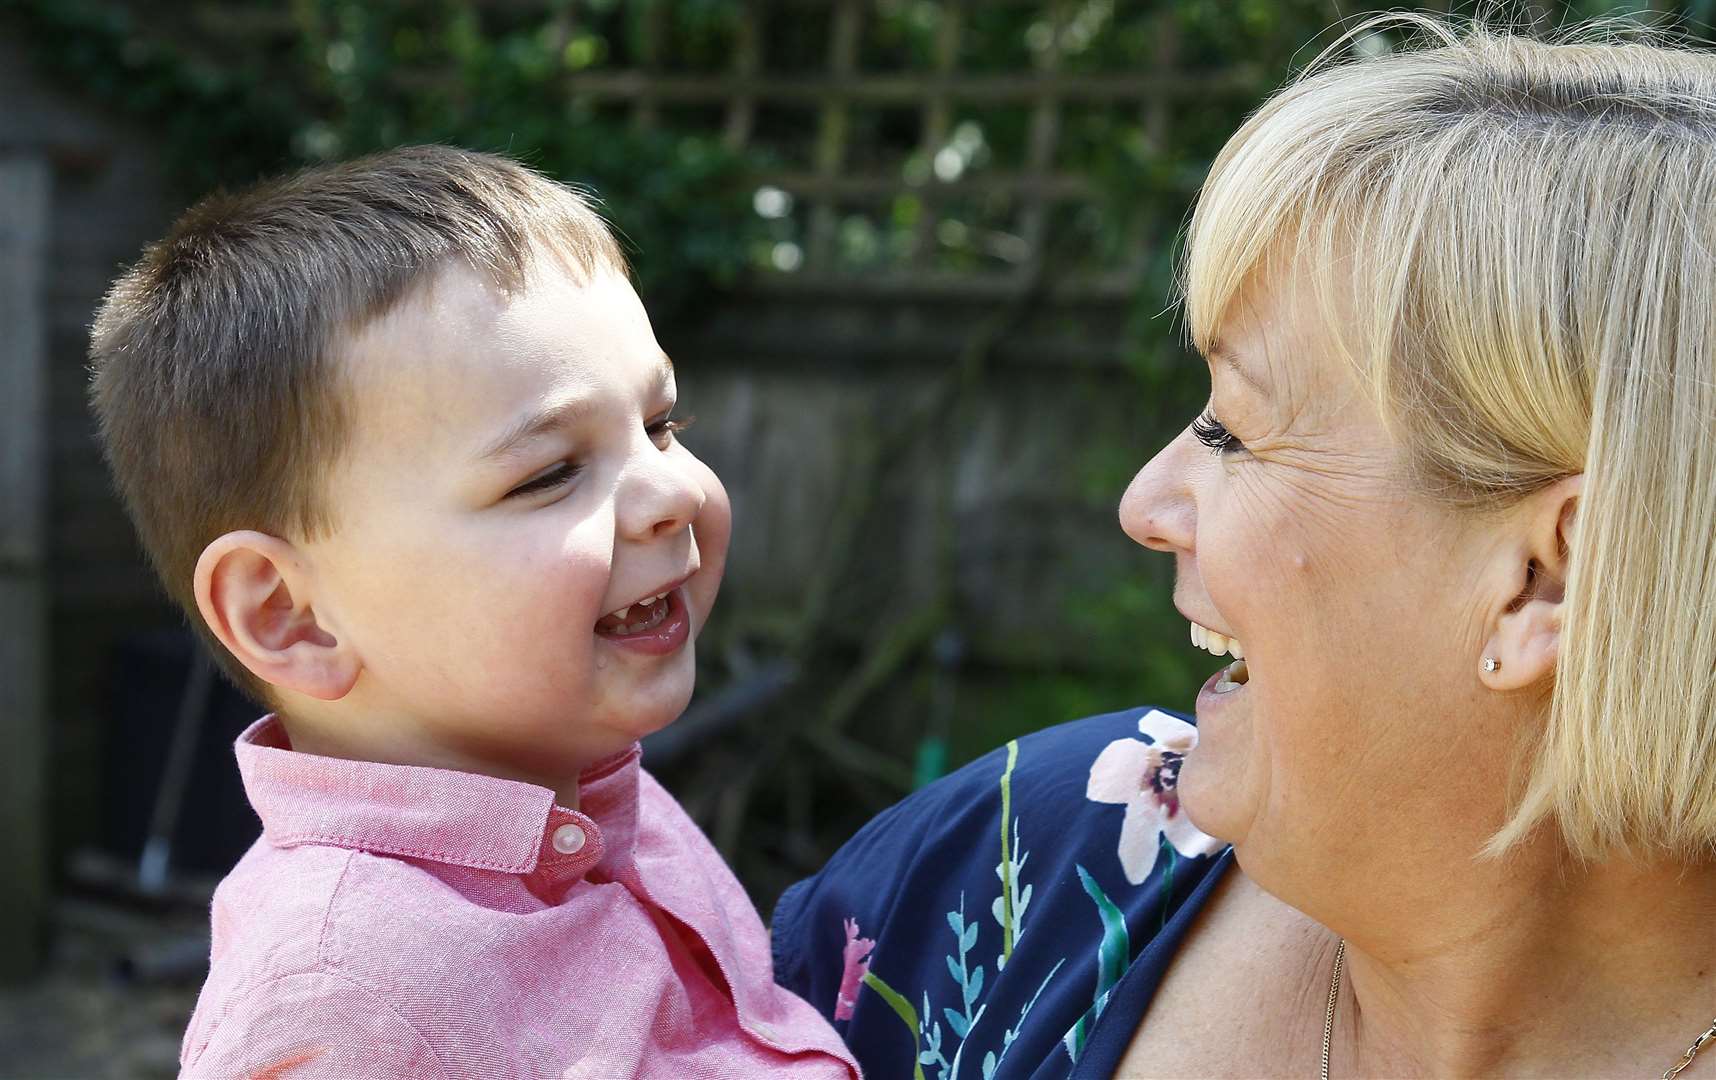 Tony Hudgell, pictured with mum Paula who adopted him, won a Children's Award in 2019